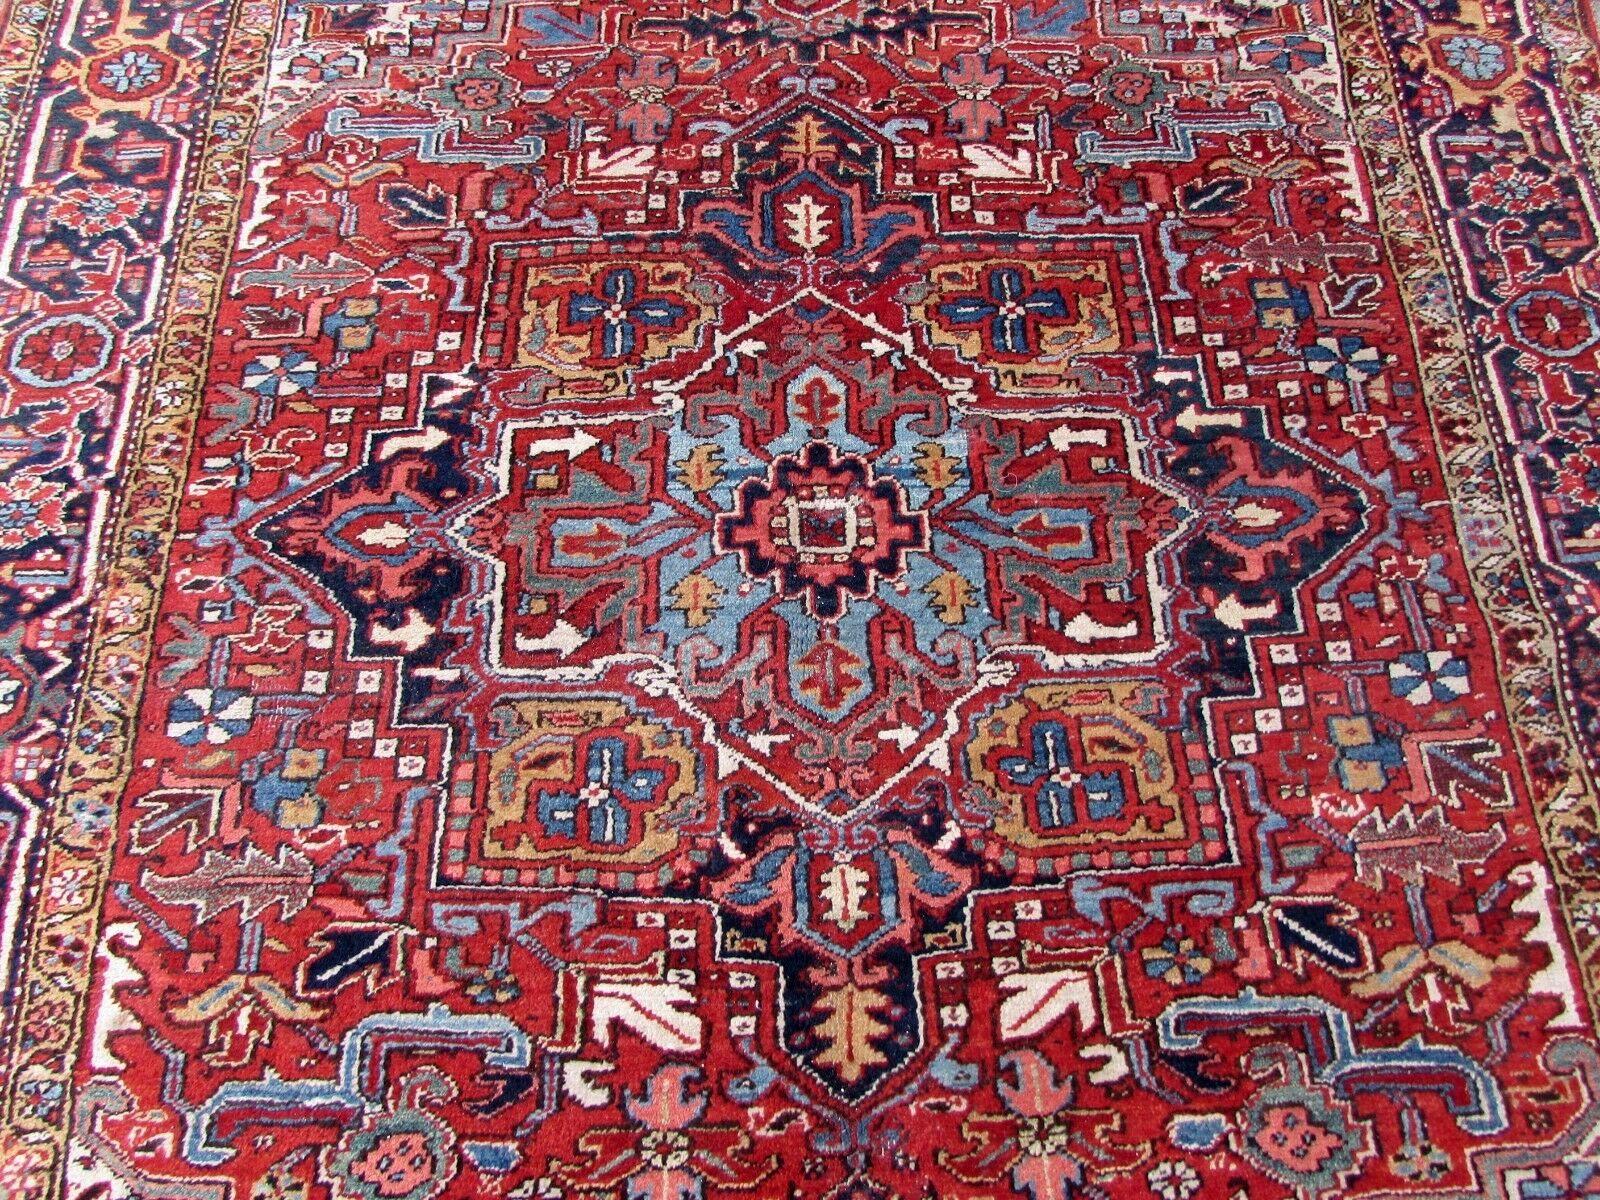 Handmade antique Heriz rug in red wool. The rug is from the beginning of 20th century, it is in original condition, has some low pile.

-condition: original, some low pile,

-circa 1920s,

-size: 6.3' x 8.8' (192cm x 270cm),

-material: